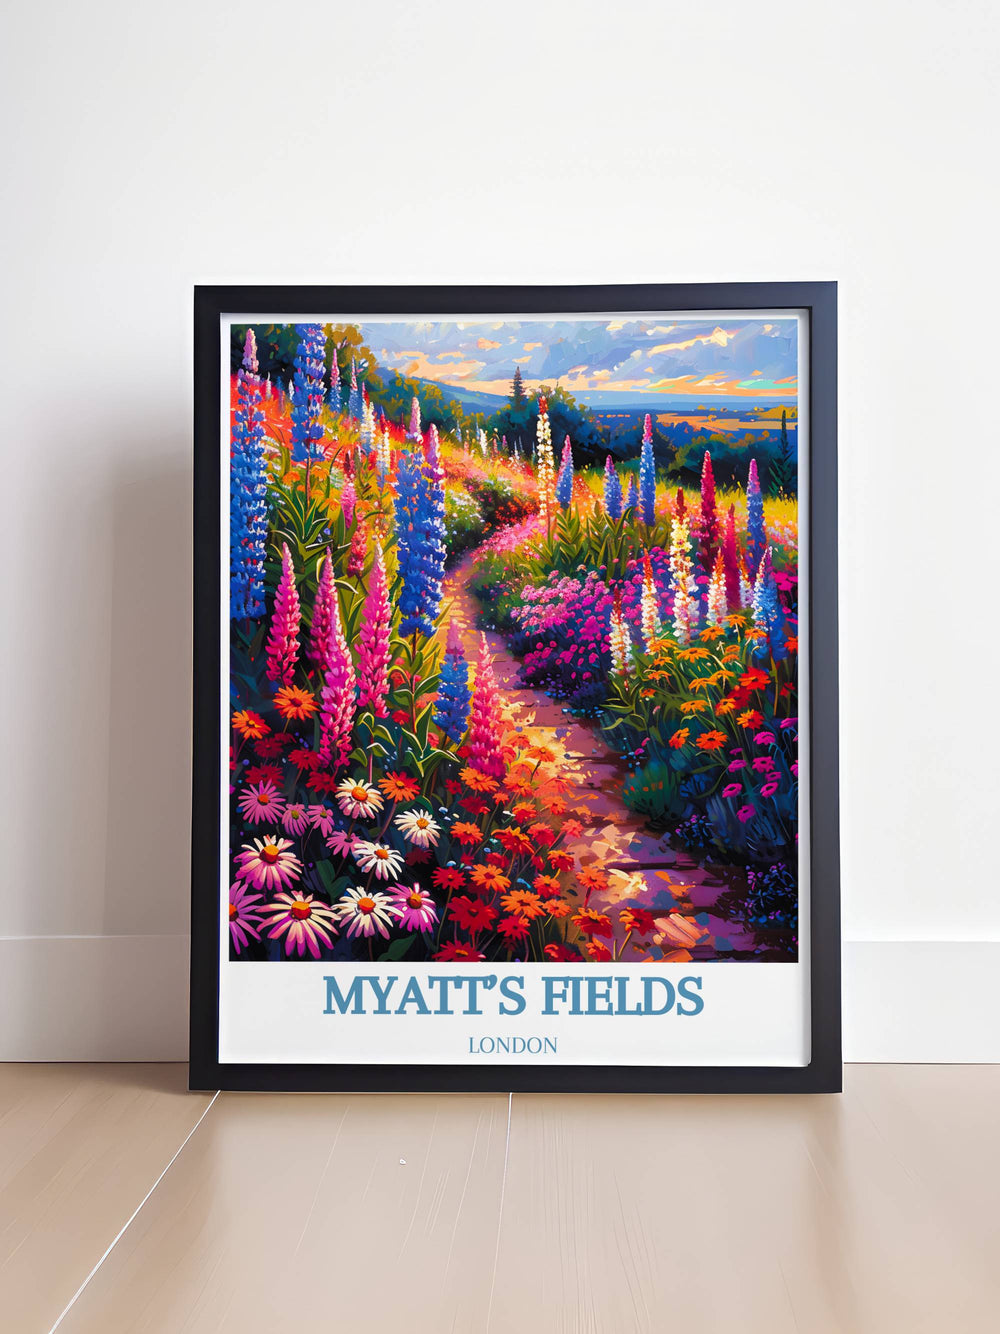 Framed art depicting the ornamental gardens during spring bloom, showcasing detailed landscaping and vibrant colors.